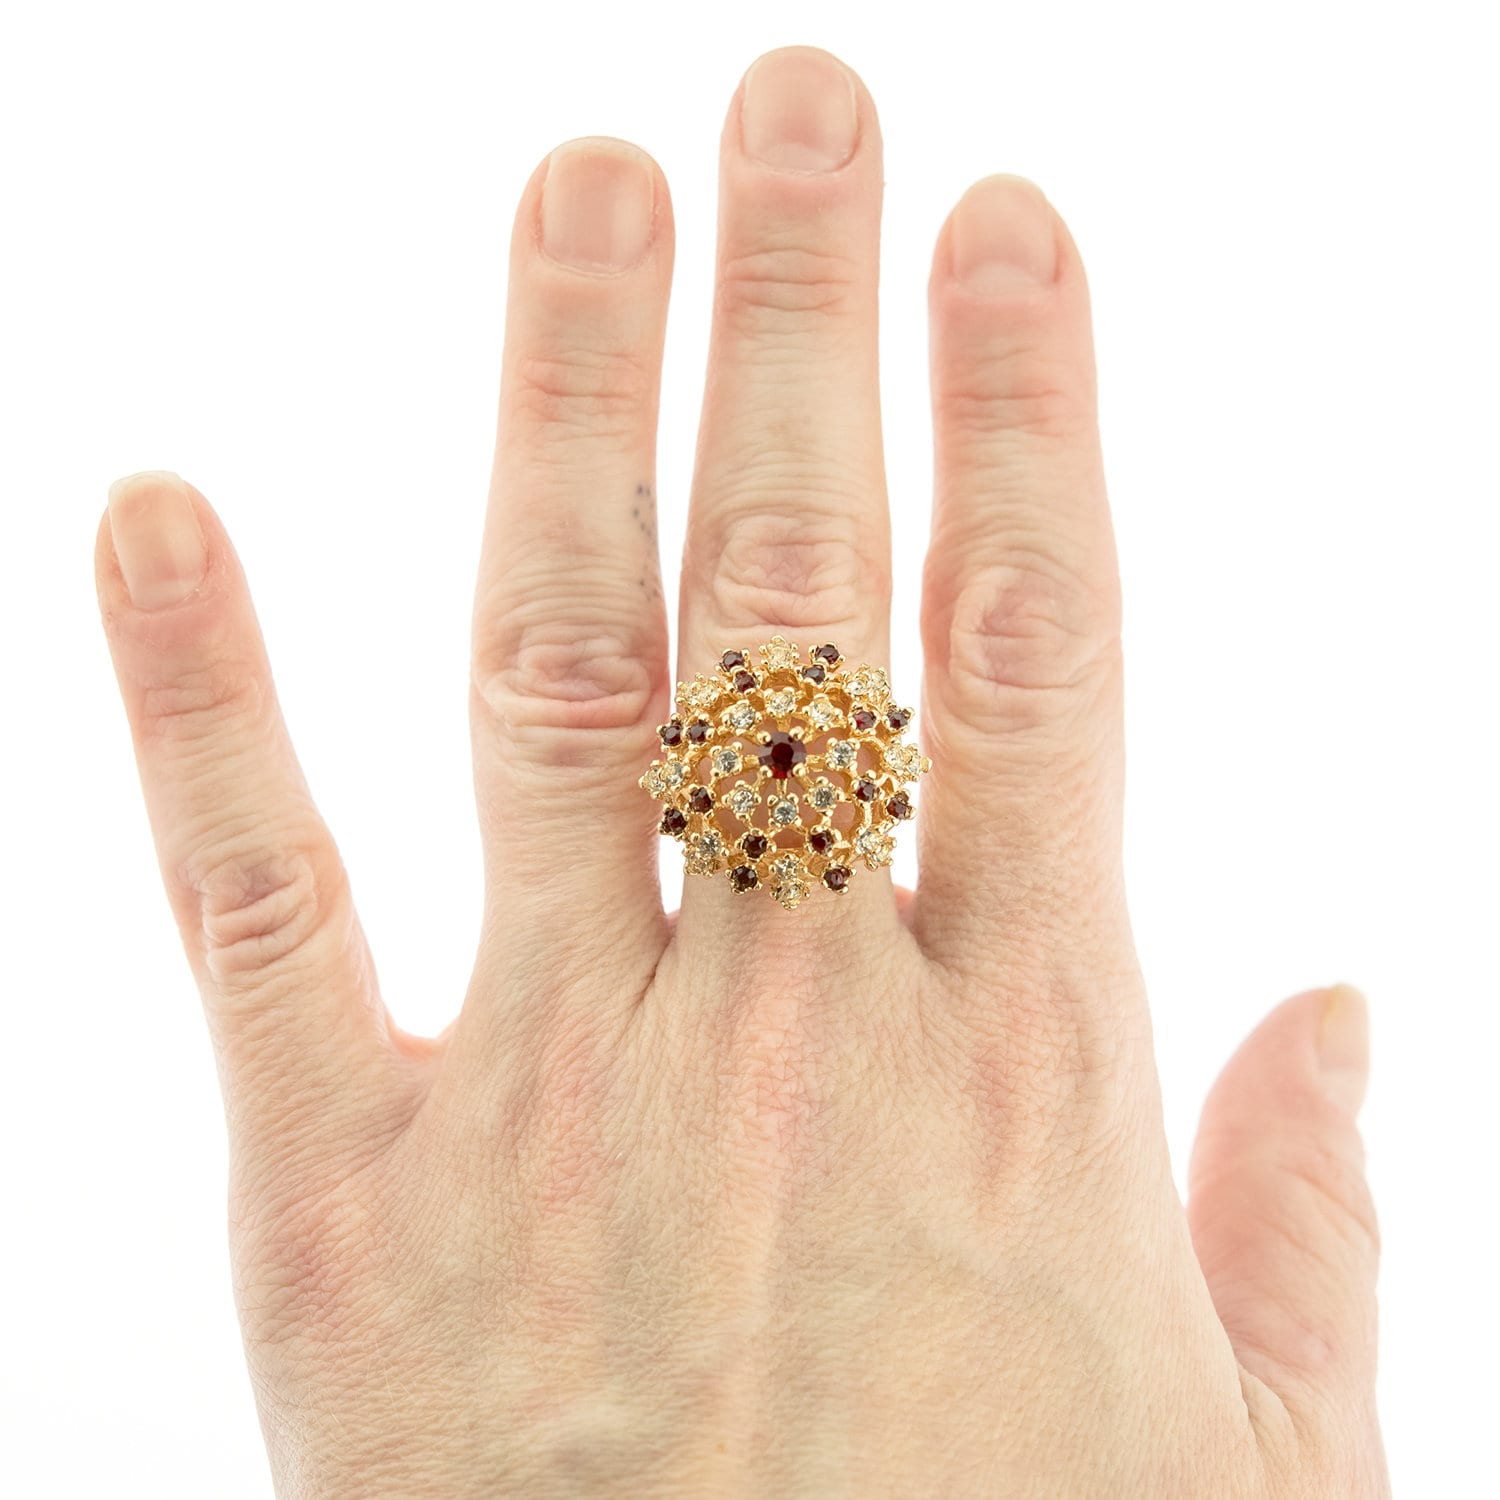 Vintage Ring Ruby and Clear Swarovski Crystal Burst Ring 18k Gold  R195 - Limited Stock - Never Worn